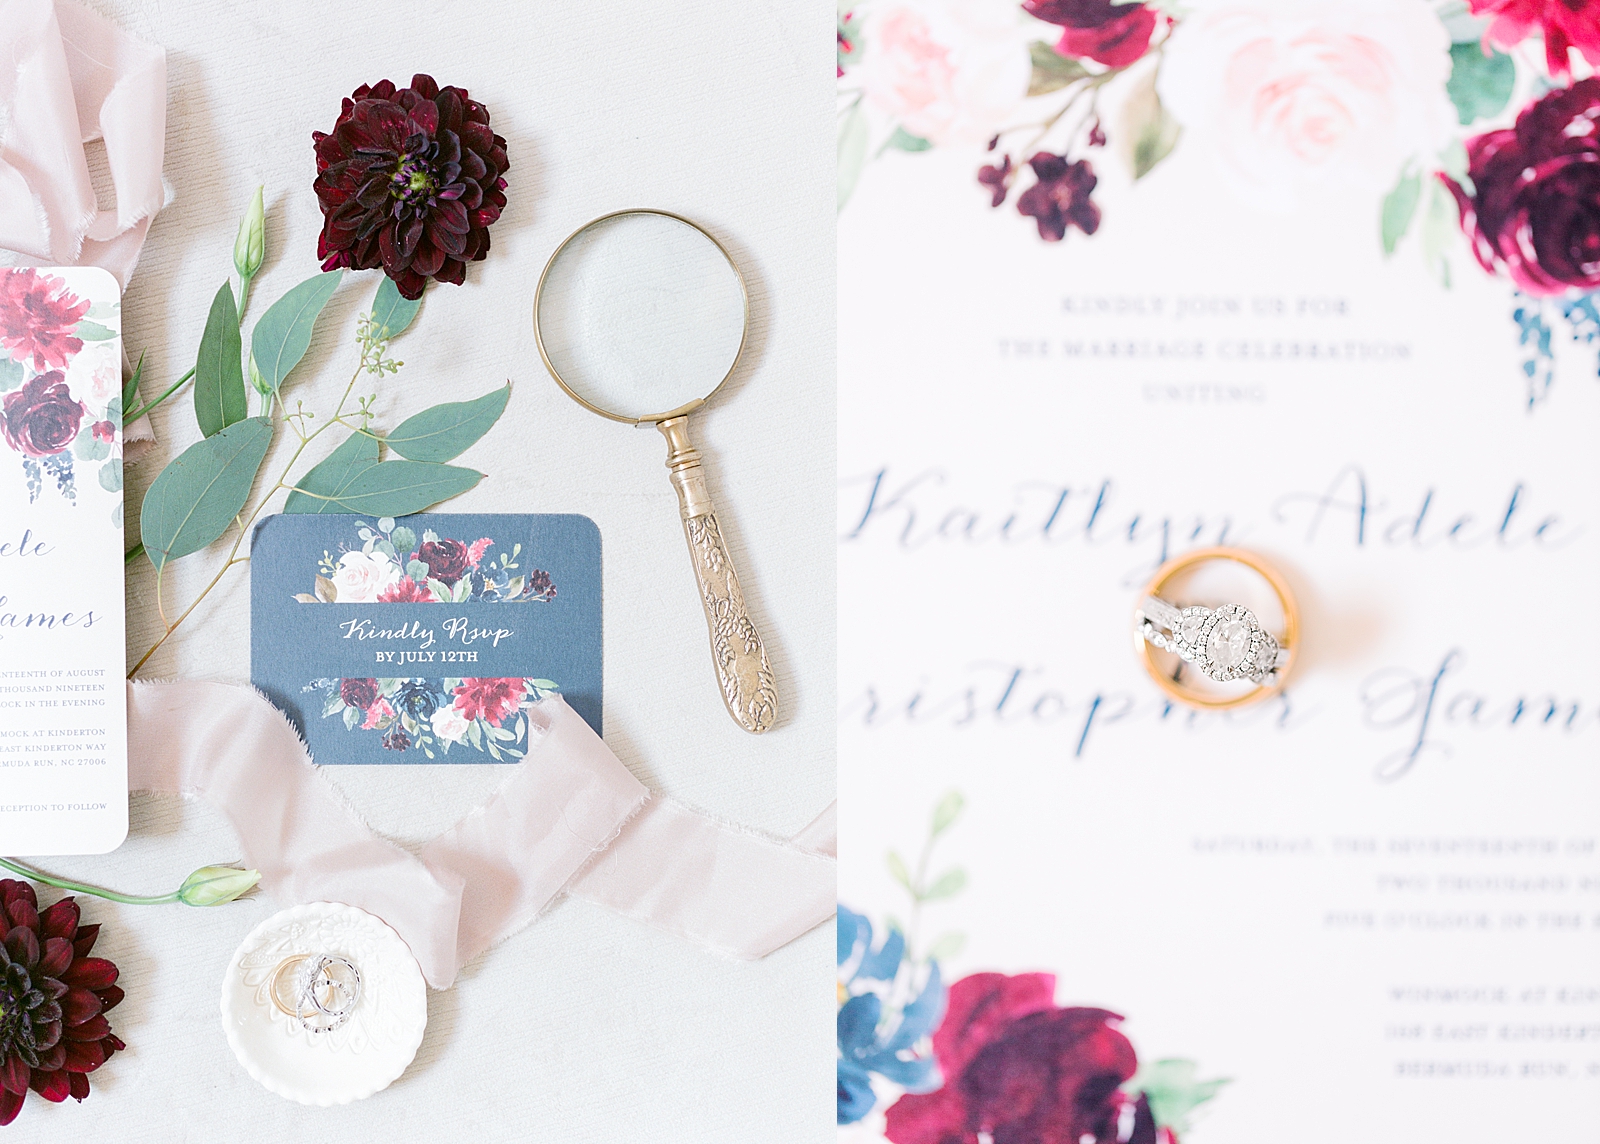 Winmock Wedding Invitation Suite and Detail of Rings on Invitation Photos